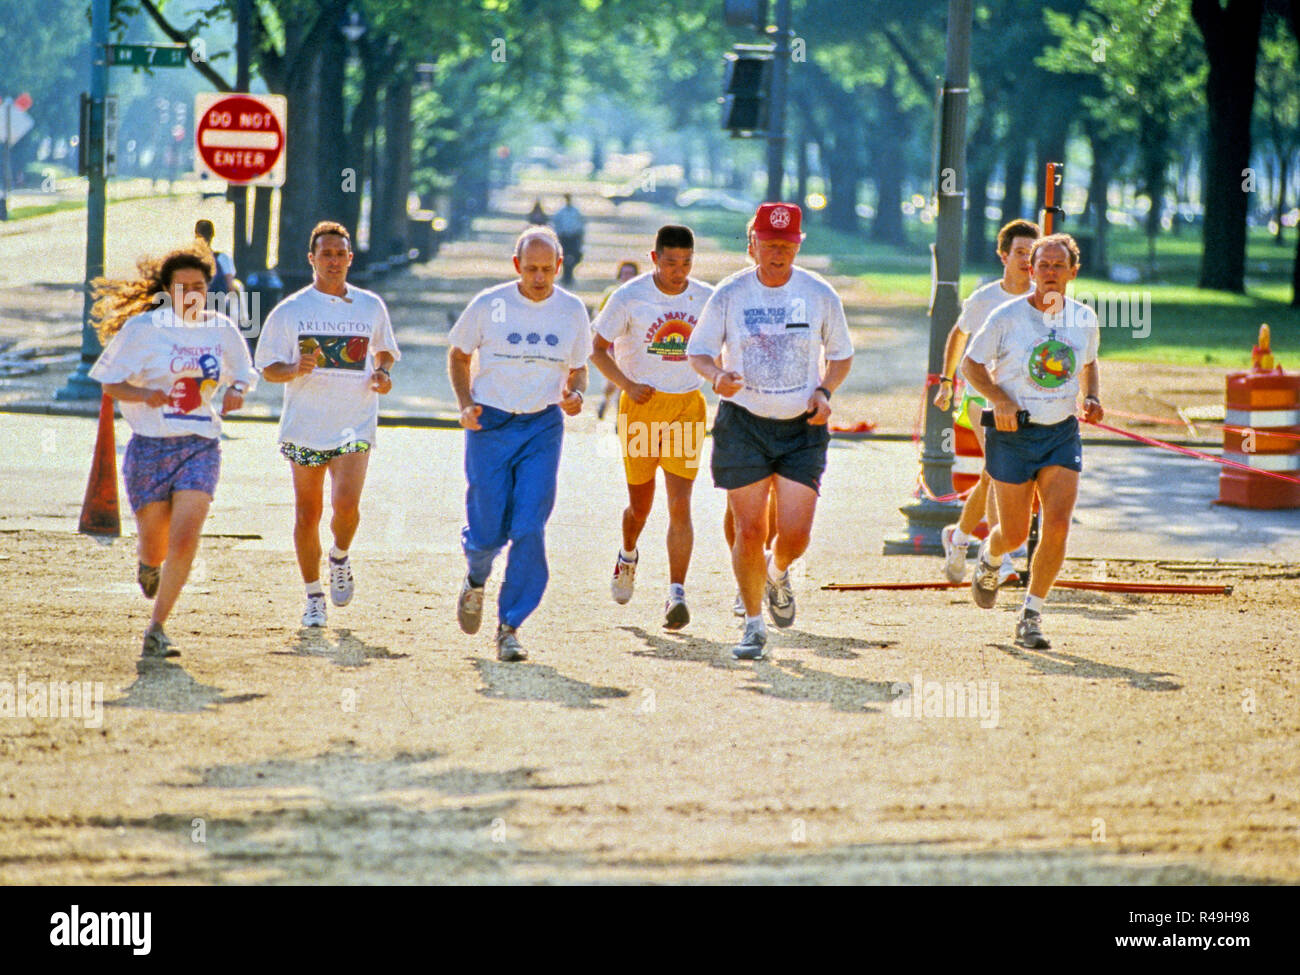 Washington, District of Columbia, USA. 16th May, 1994. United States President Bill Clinton, third right, goes jogging with Chief Judge Stephen Breyer, of the US Court of Appeals for the First Circuit, third left, along the Mall in Washington, DC on May 16, 1994. The President nominated Judge Breyer to be Associate Justice of the Supreme Court to replace Justice Harry Blackmun, who is retiring. Judge Breyer's daughter is at the far left Credit: Jeff Markowitz/CNP/ZUMA Wire/Alamy Live News Stock Photo